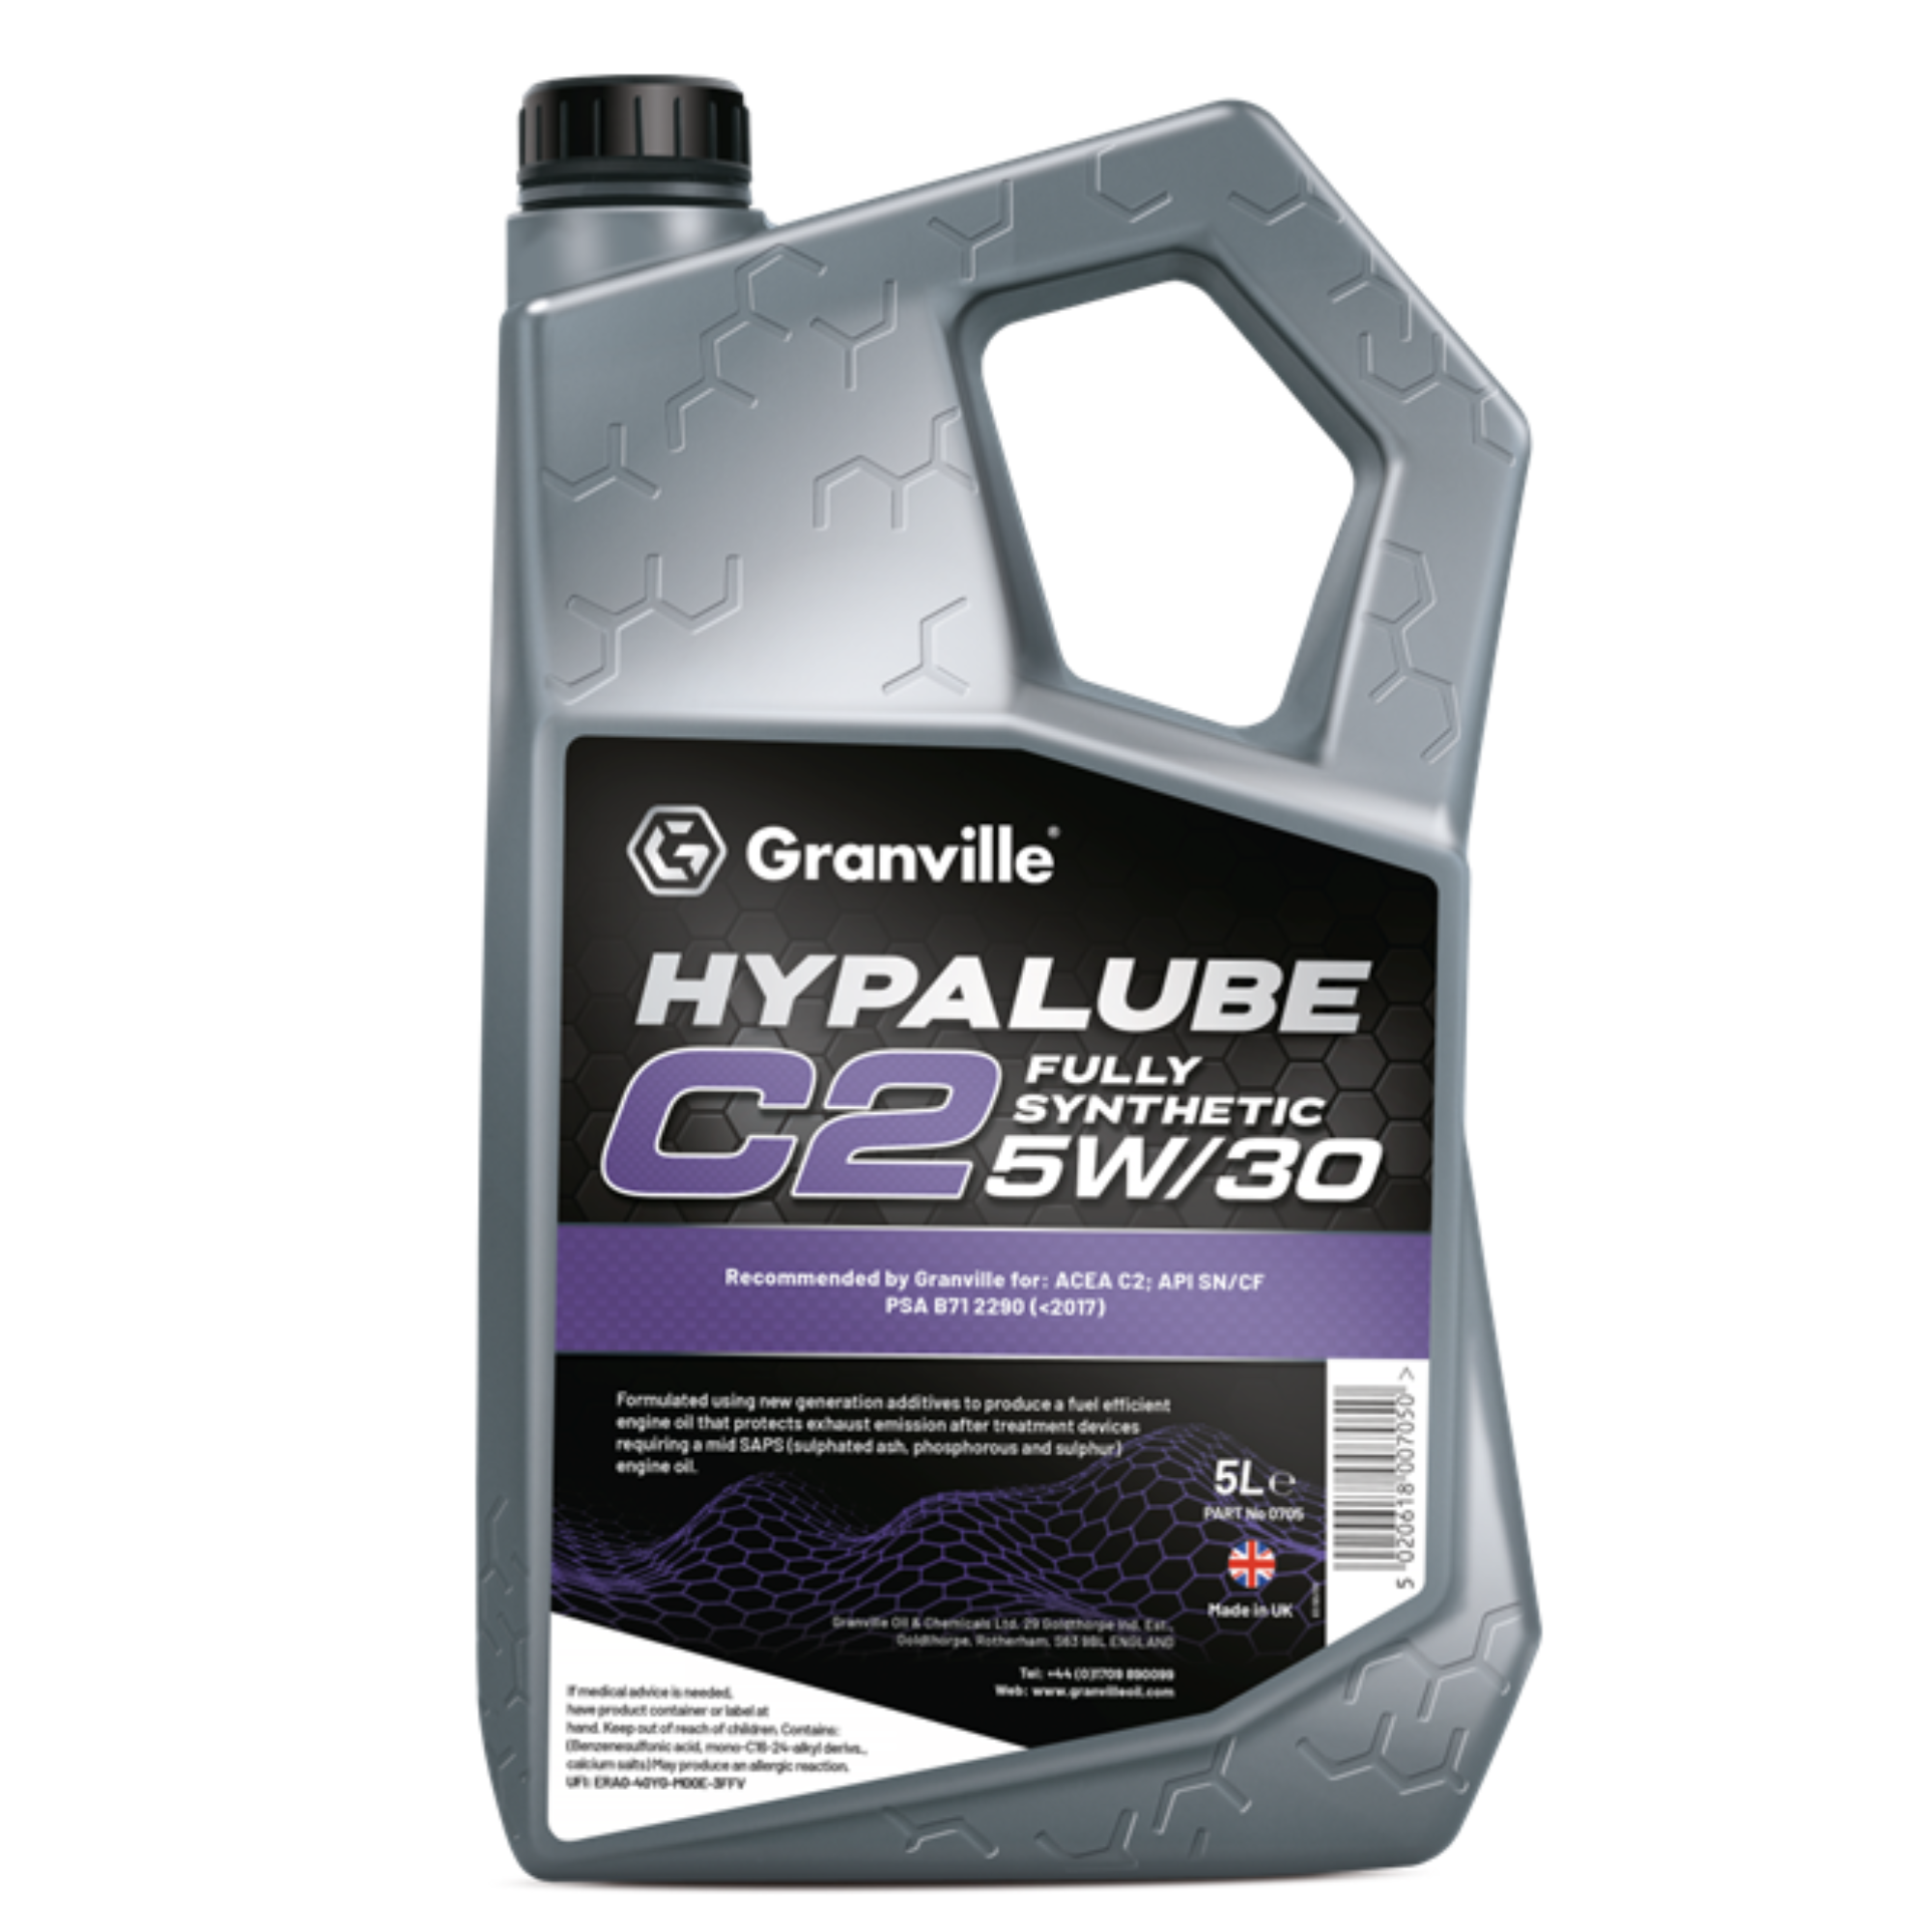 Granville Hypalube C2 Fully Synthetic 5W/30 5 Litres